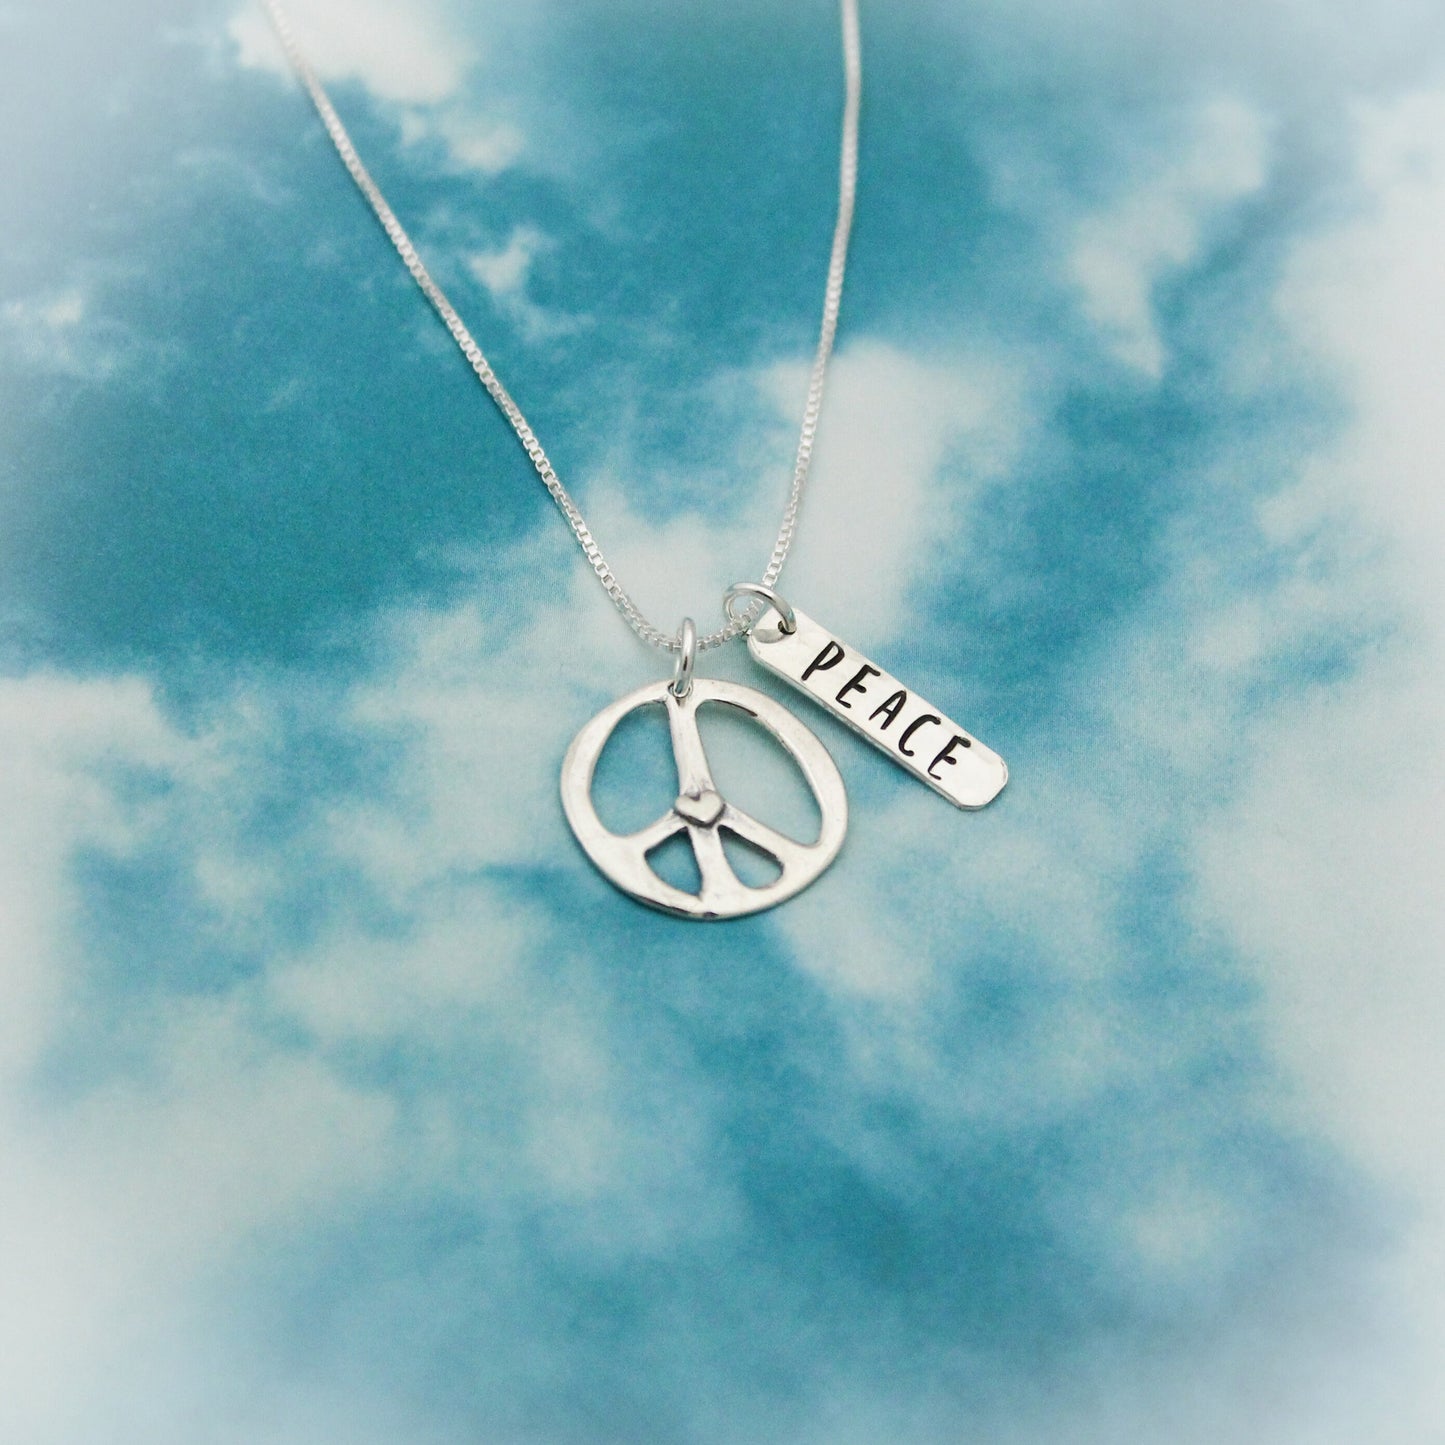 Peace Heart Necklace, Sterling Silver Peace + Love Necklace, Peace Sign Gift, Peace Love Jewelry, Birthday Jewelry Set, Peace Necklace Gift